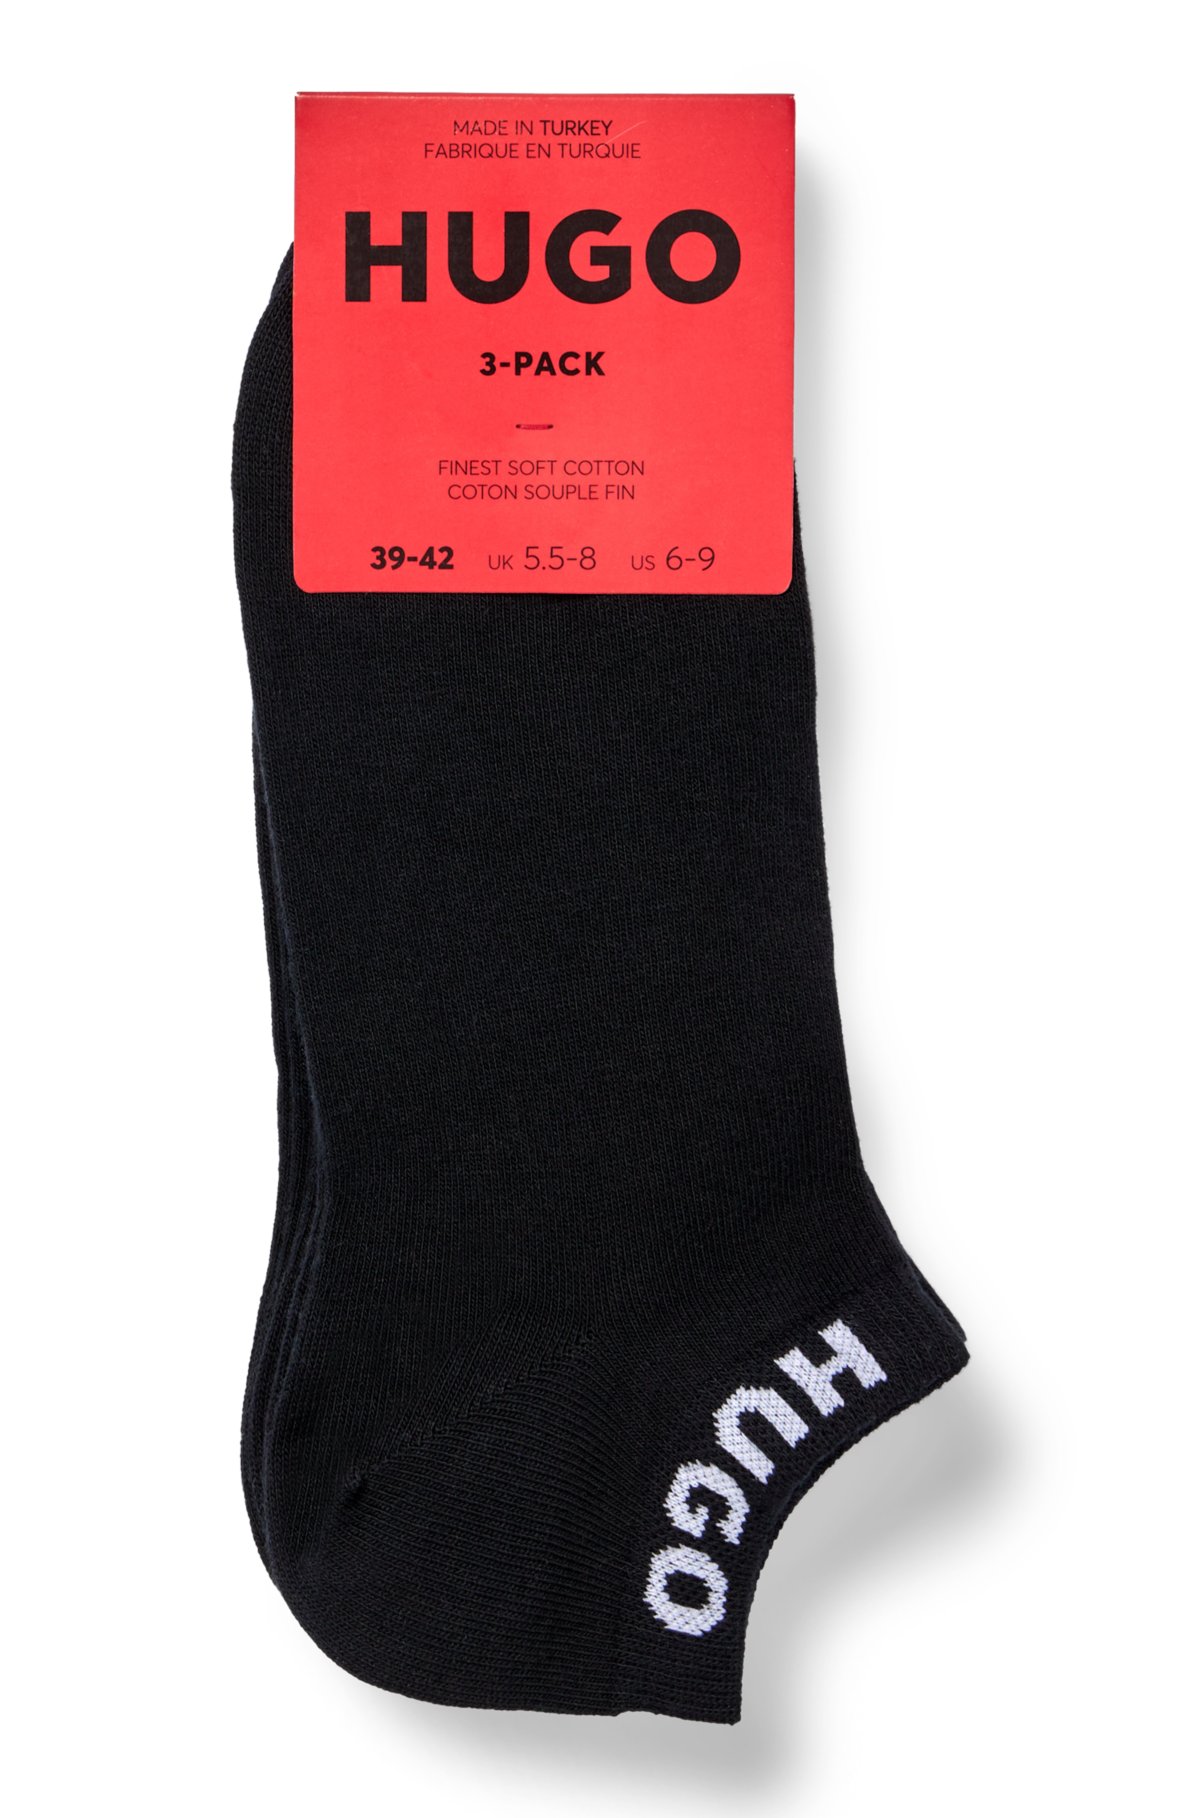 Three-pack of socks in a cotton blend, Black